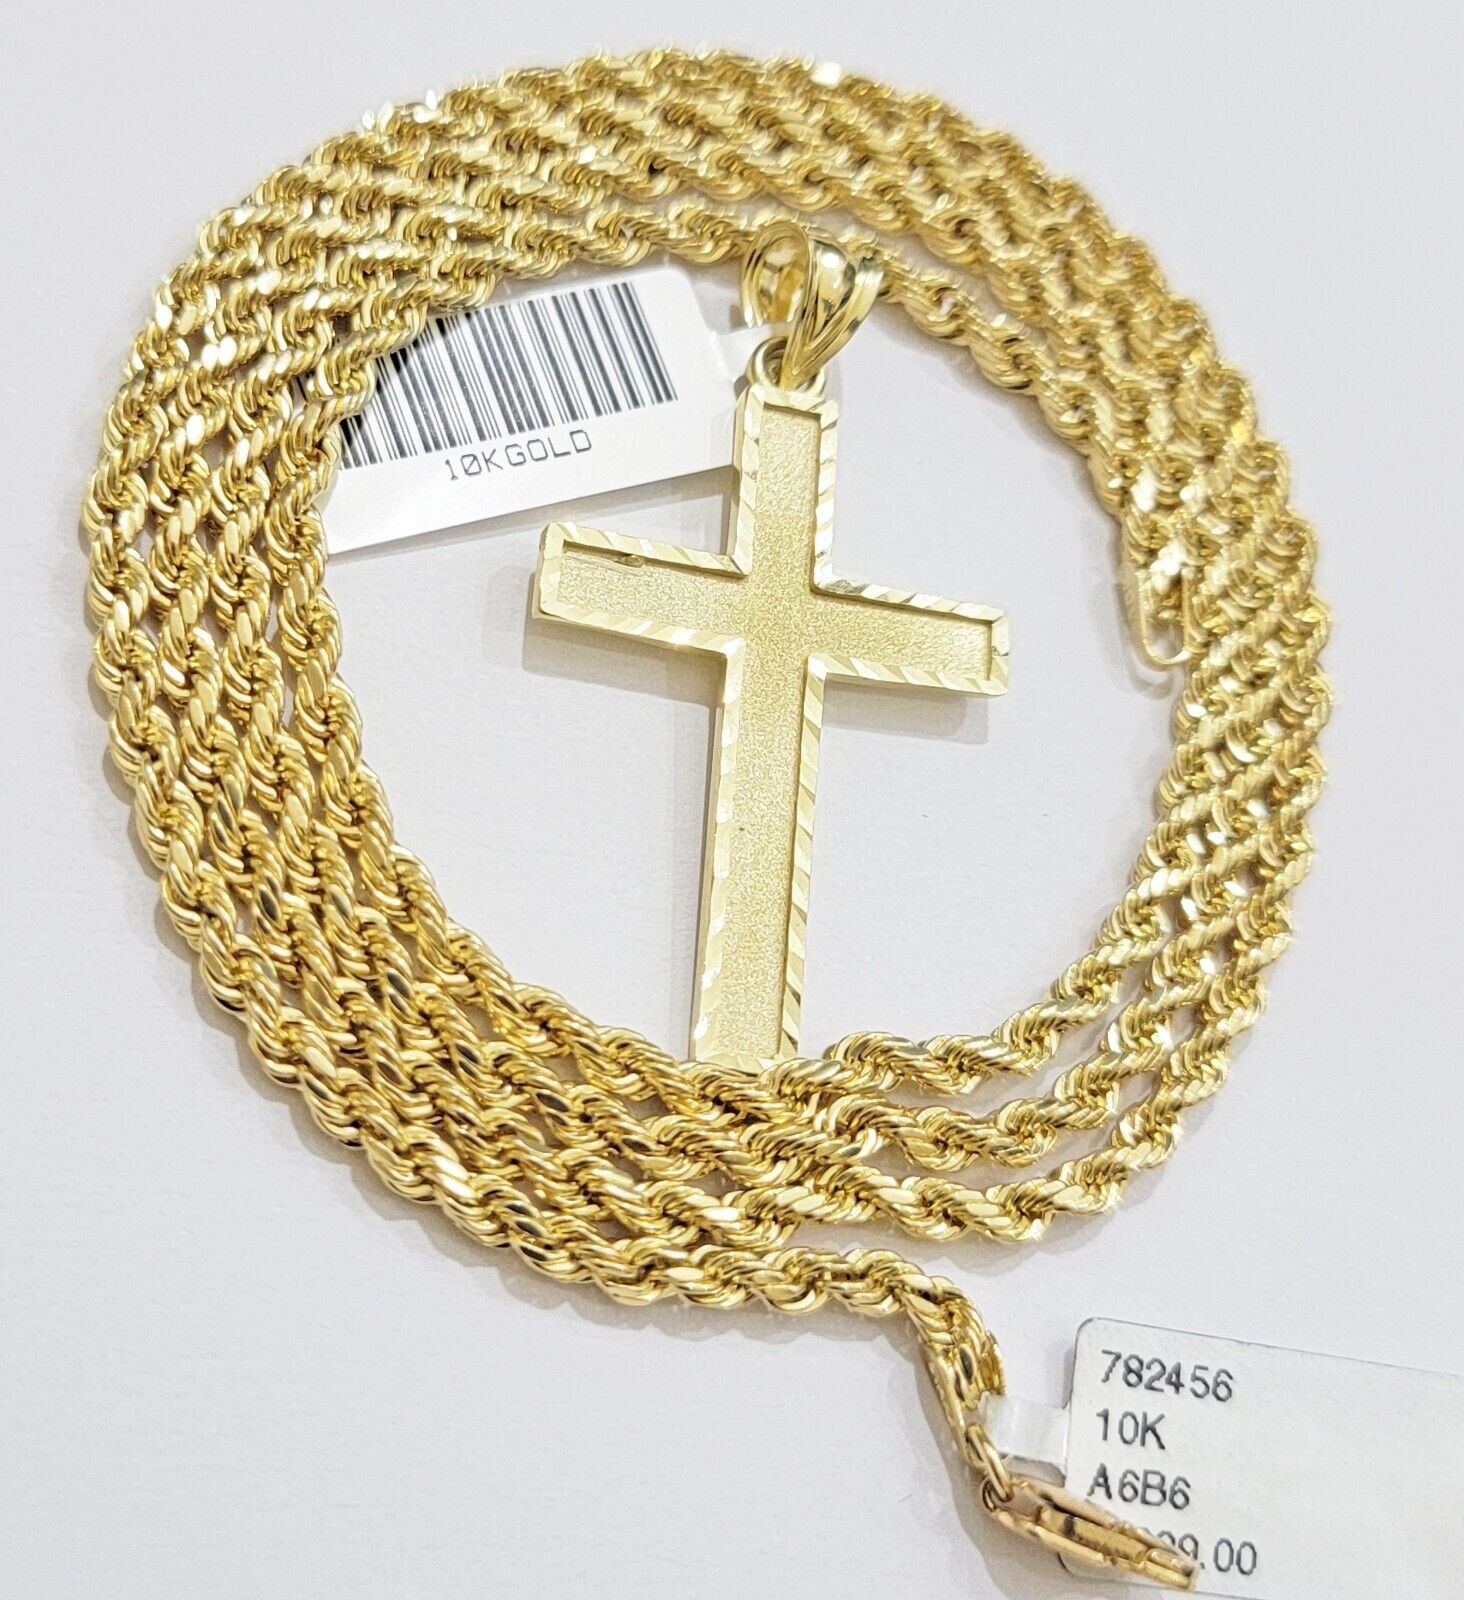 10k Yellow Gold Rope Chain & Cross Charm Set REAL 10KT 24 Inch necklace pendant